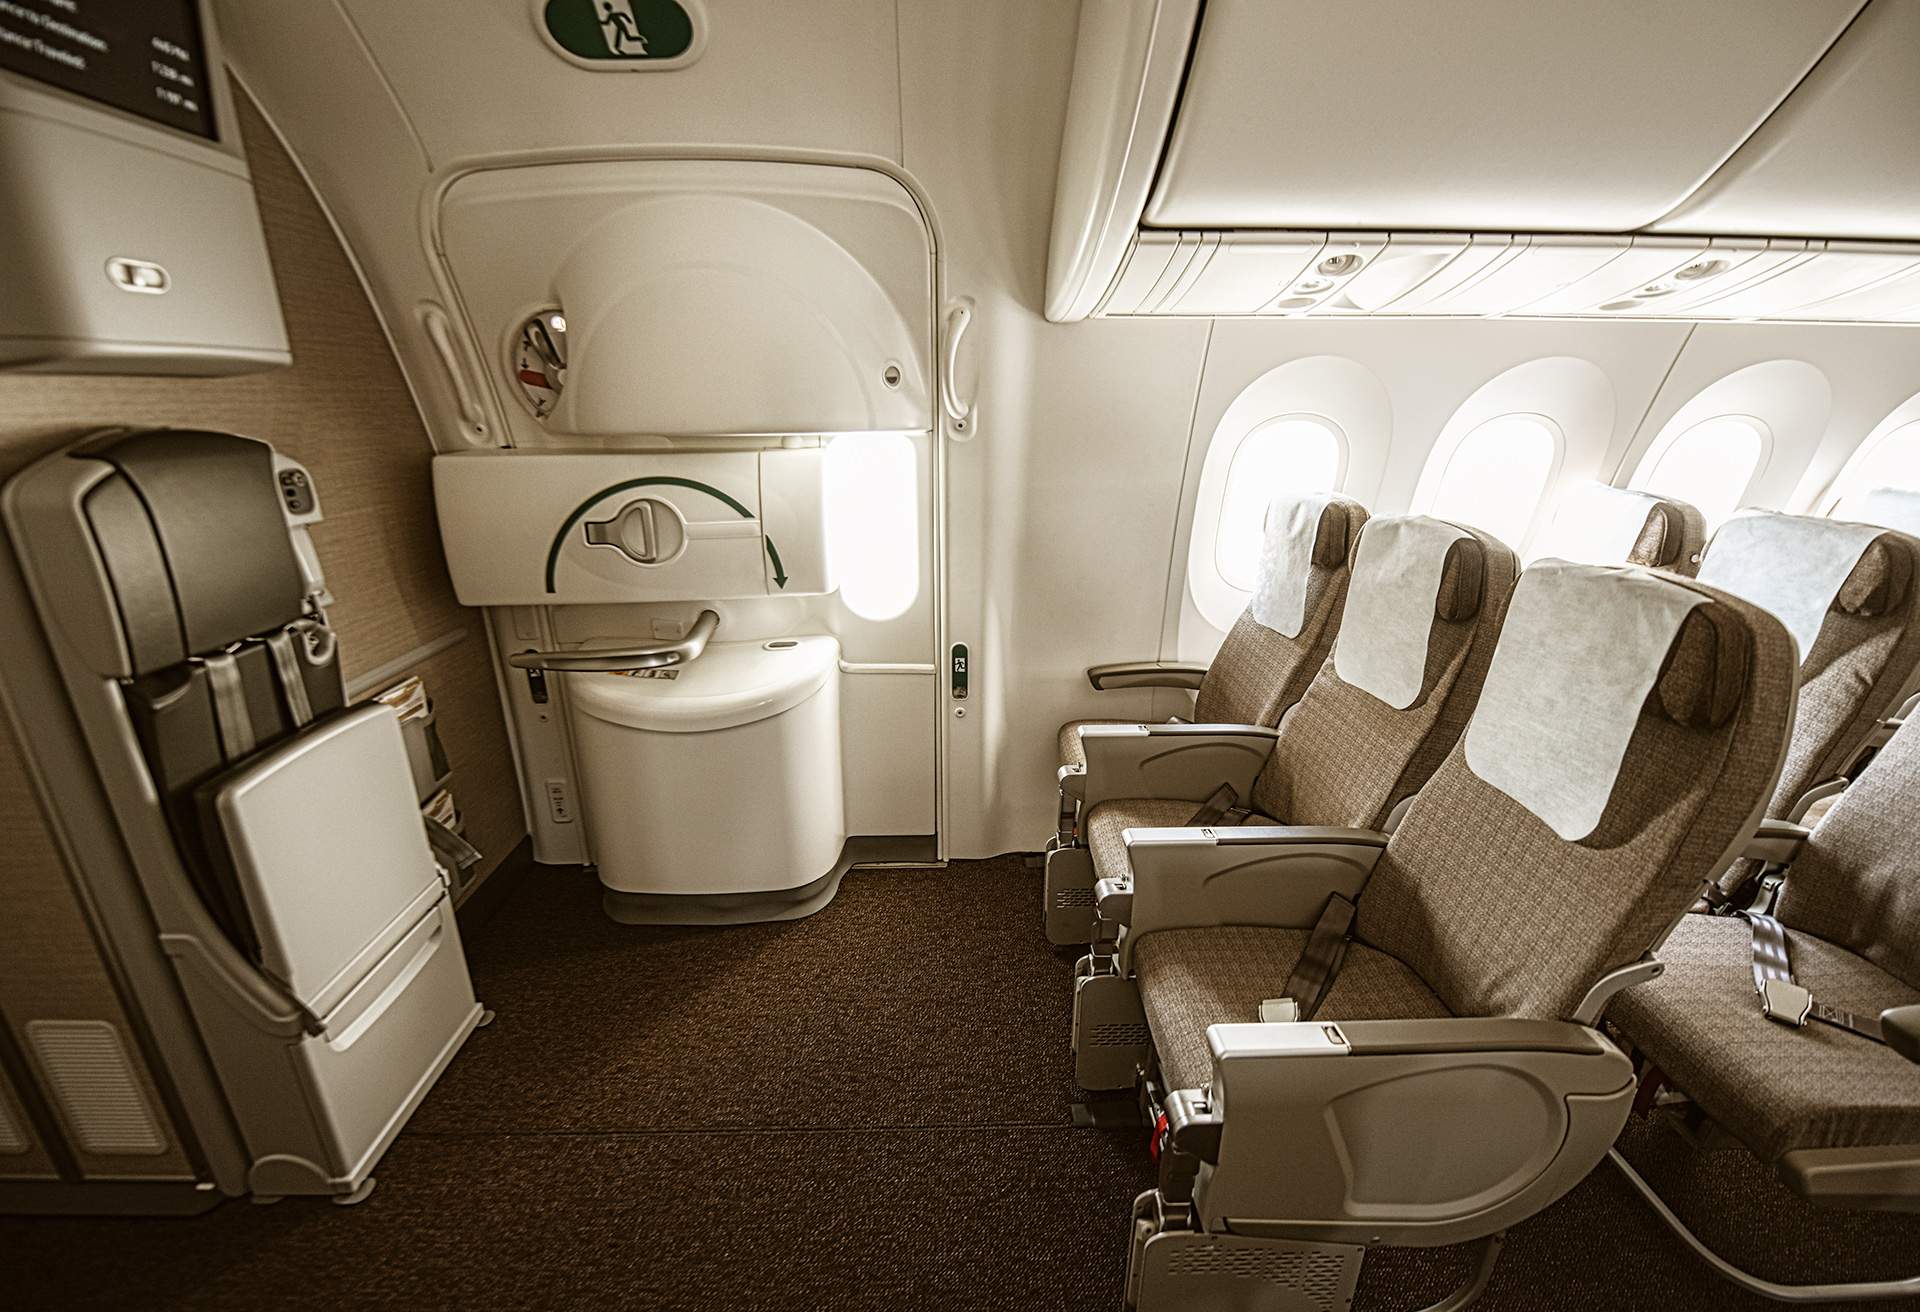 How to choose the Best Airline seat